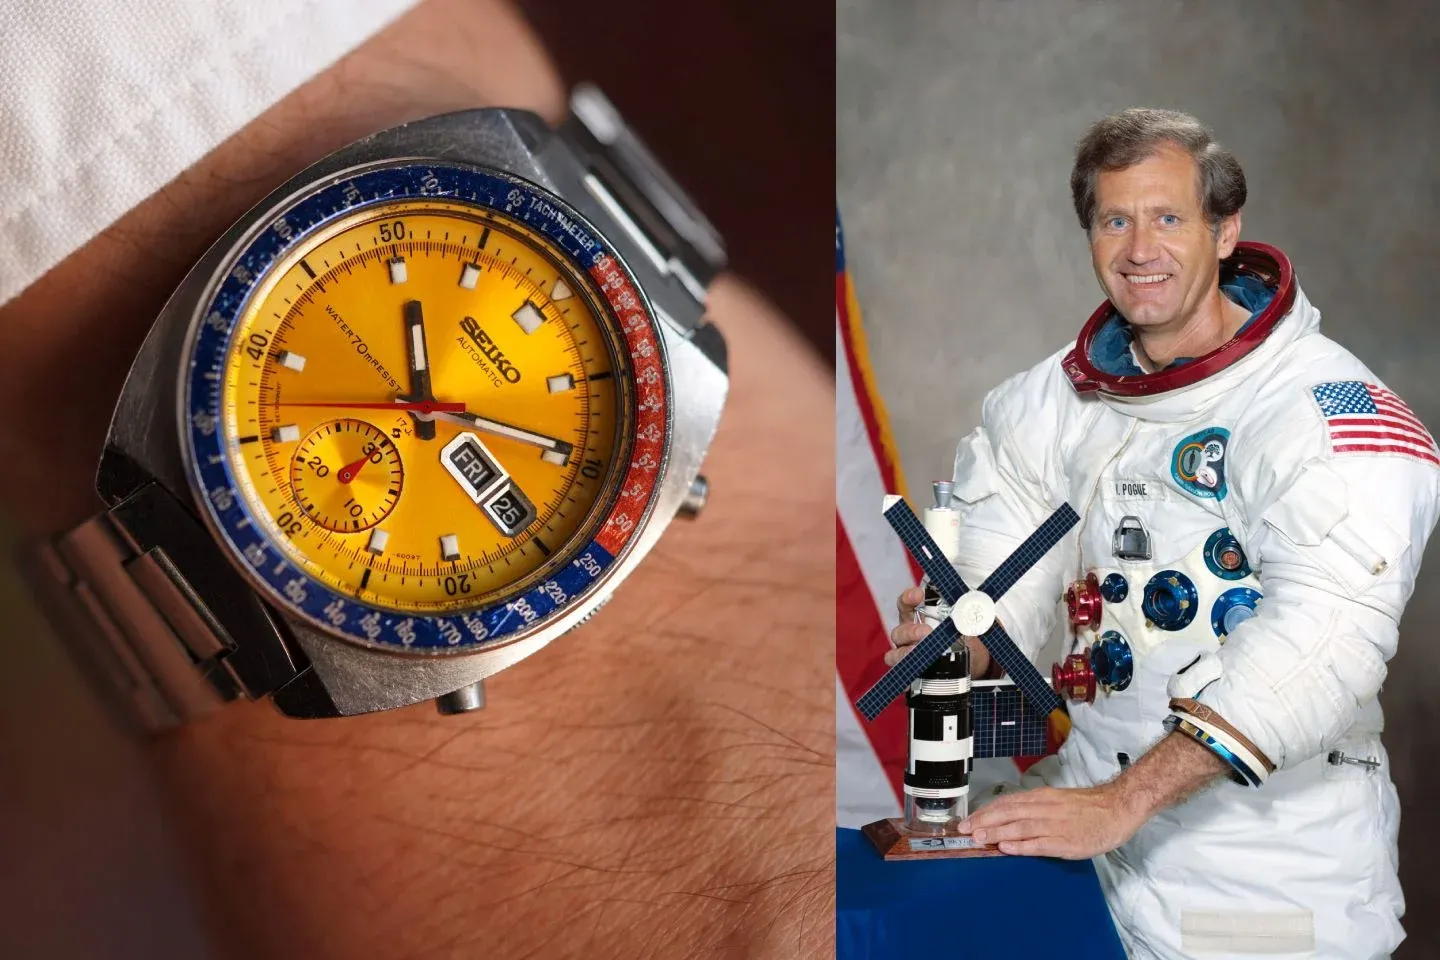 William R. Pogue, an American astronaut, sported a Speedtimer with an orange dial during his time in space making it the world’s first automatic chronograph watch in space